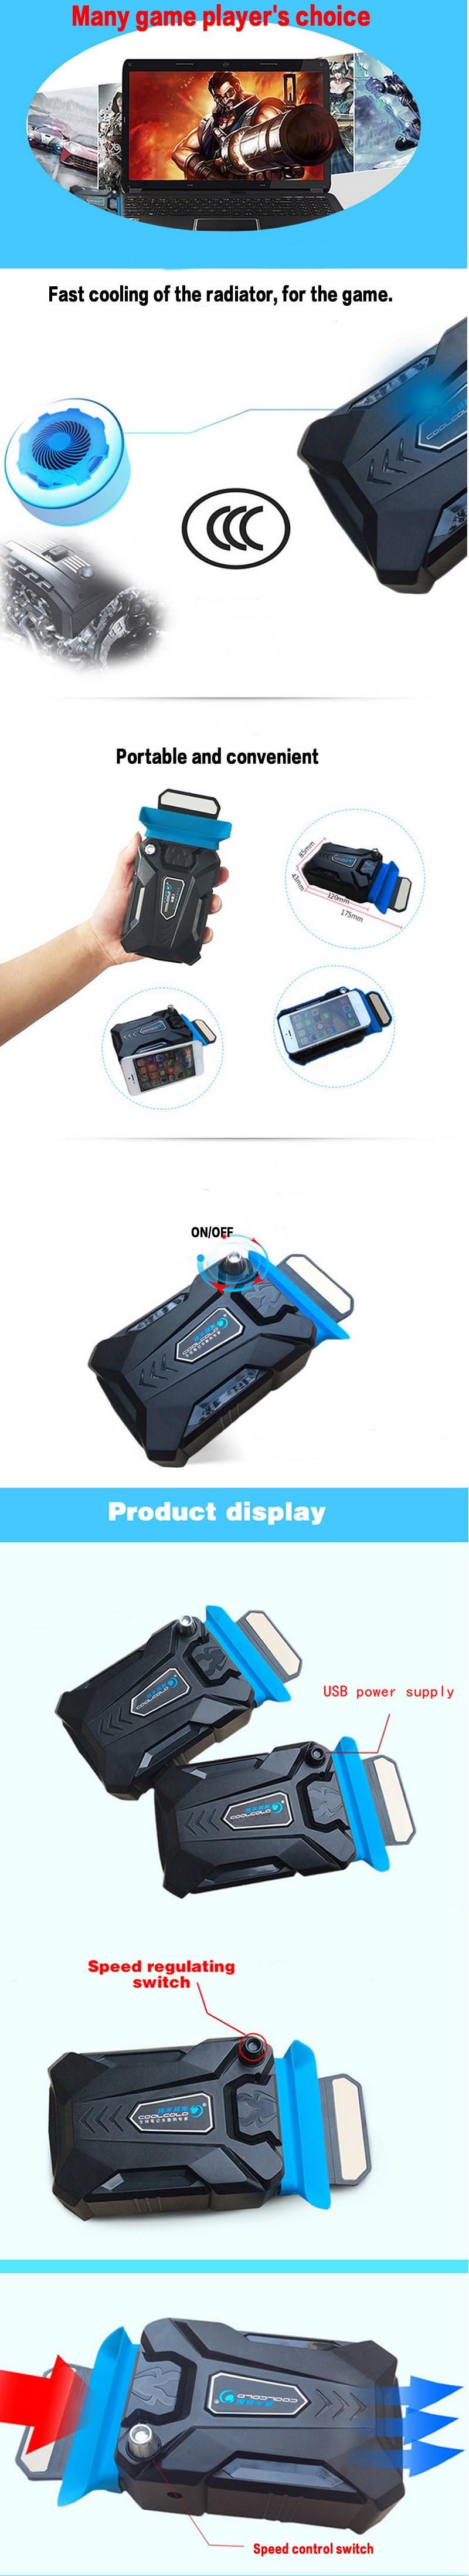 COOLCOLD-Ice-Troll3-Game-Gaming-Notebook-Laptop-Vacuum-Cooler-USB-Air-Cooler-External-Extracting-Coo-1706910